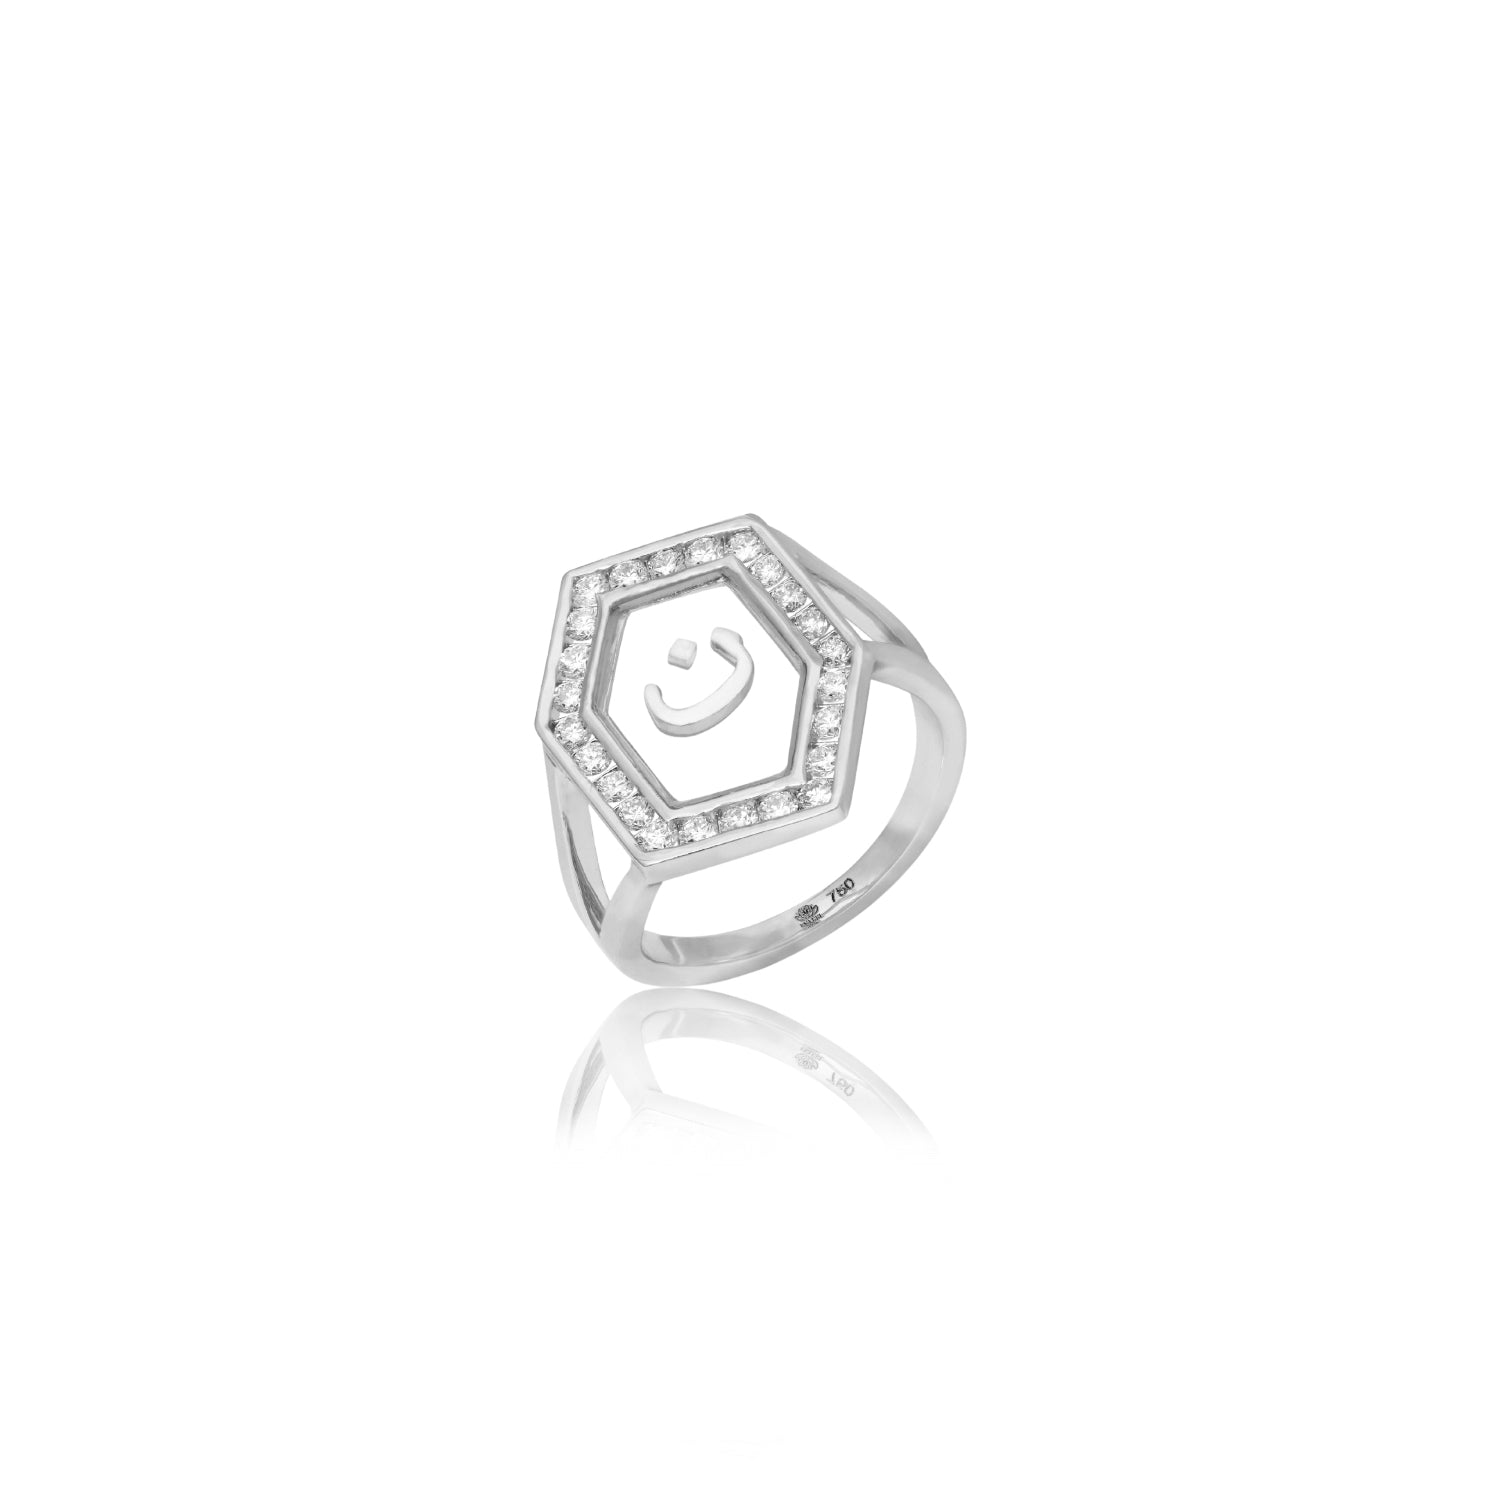 Qamoos 1.0 Letter ن Diamond Ring in White Gold